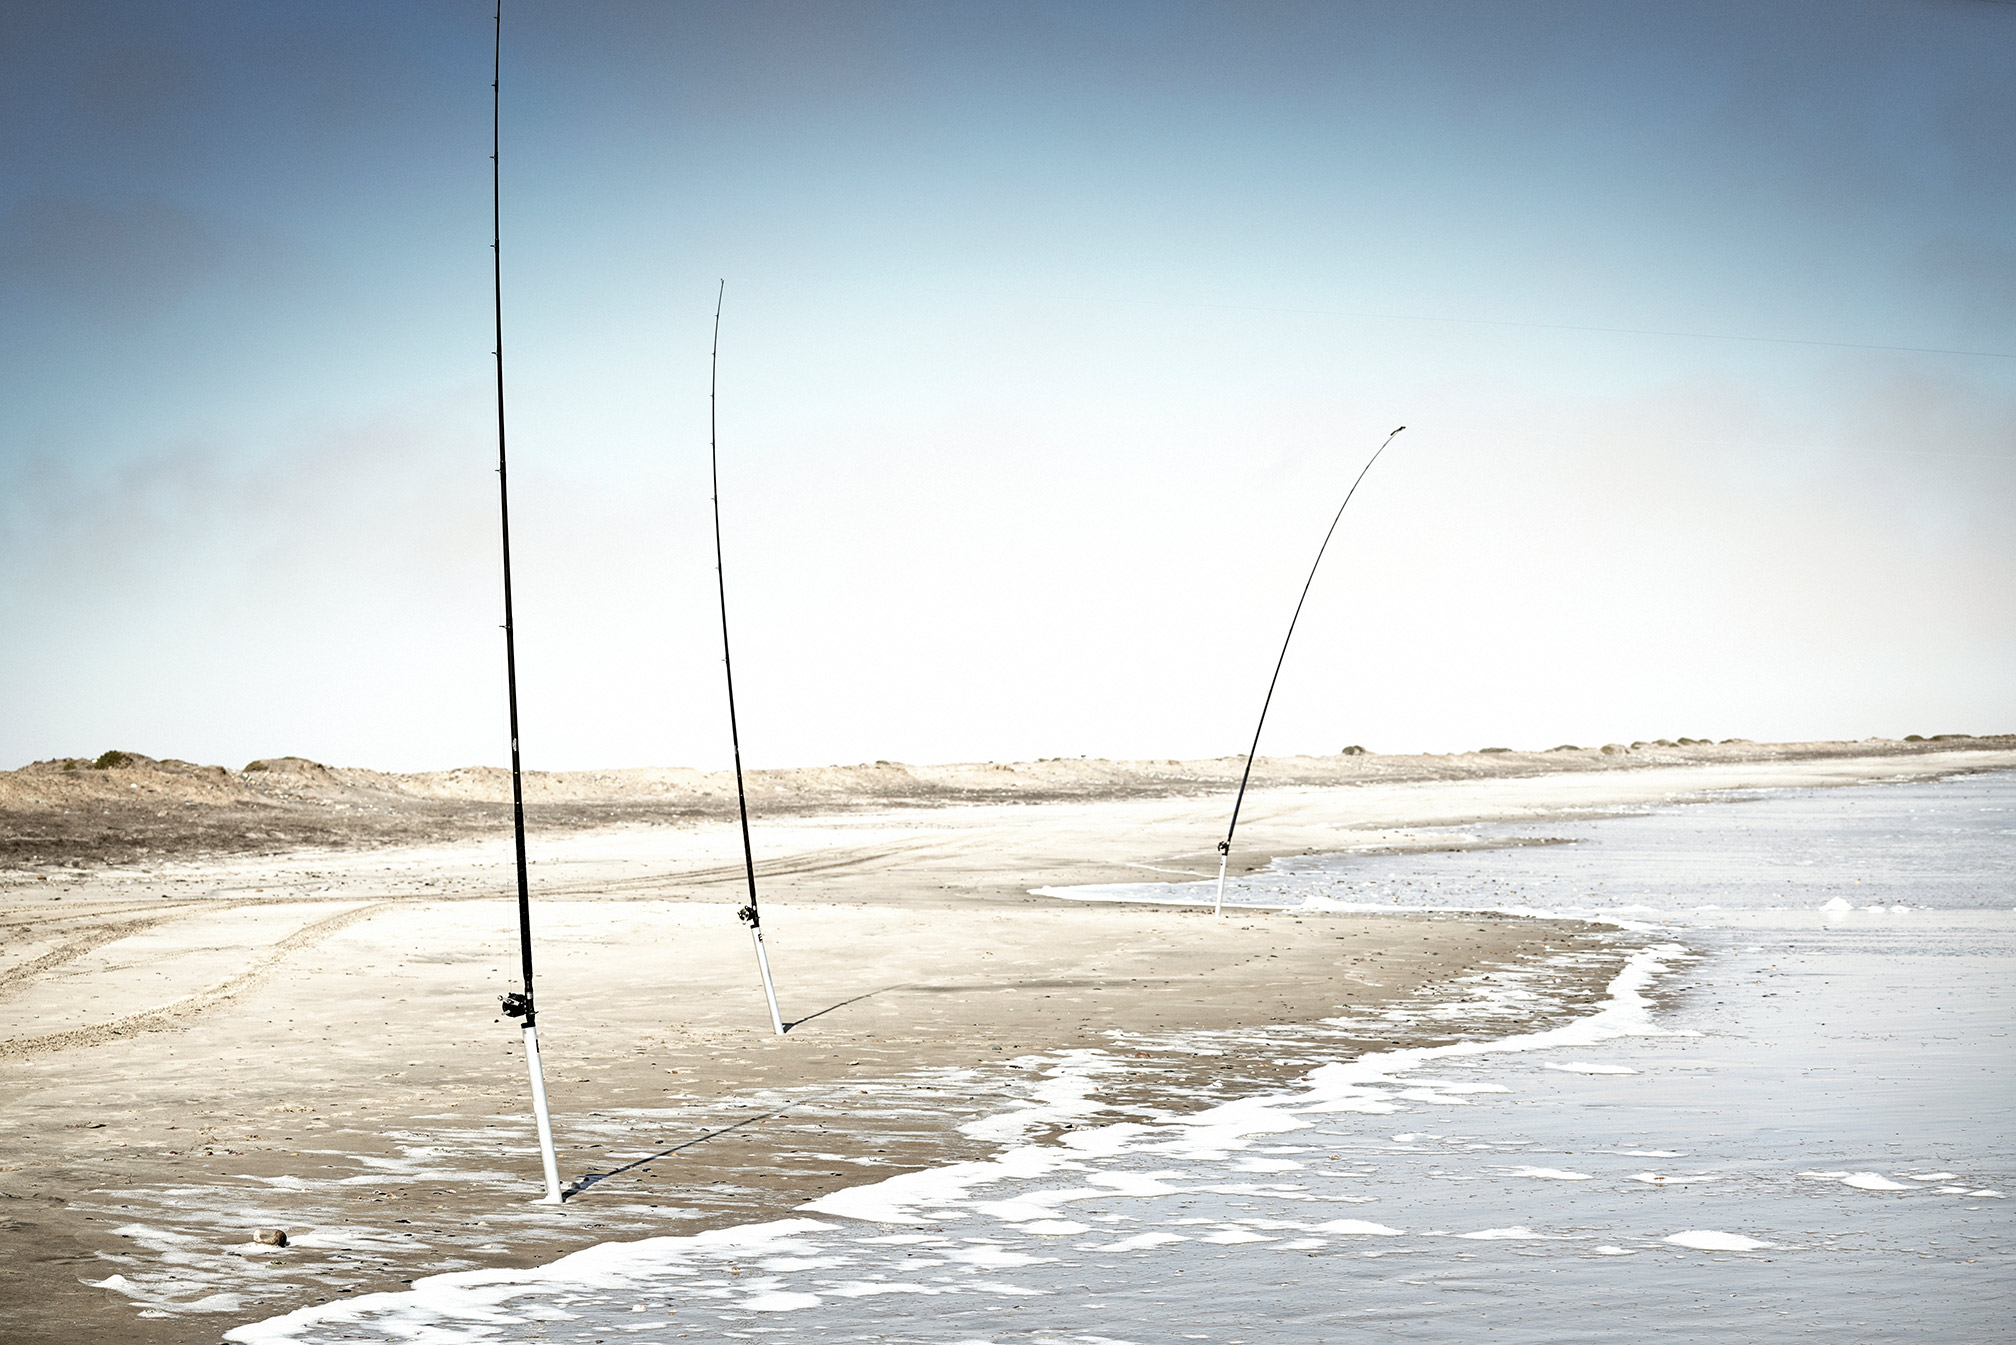 Surf fishing in Namibia, Africa